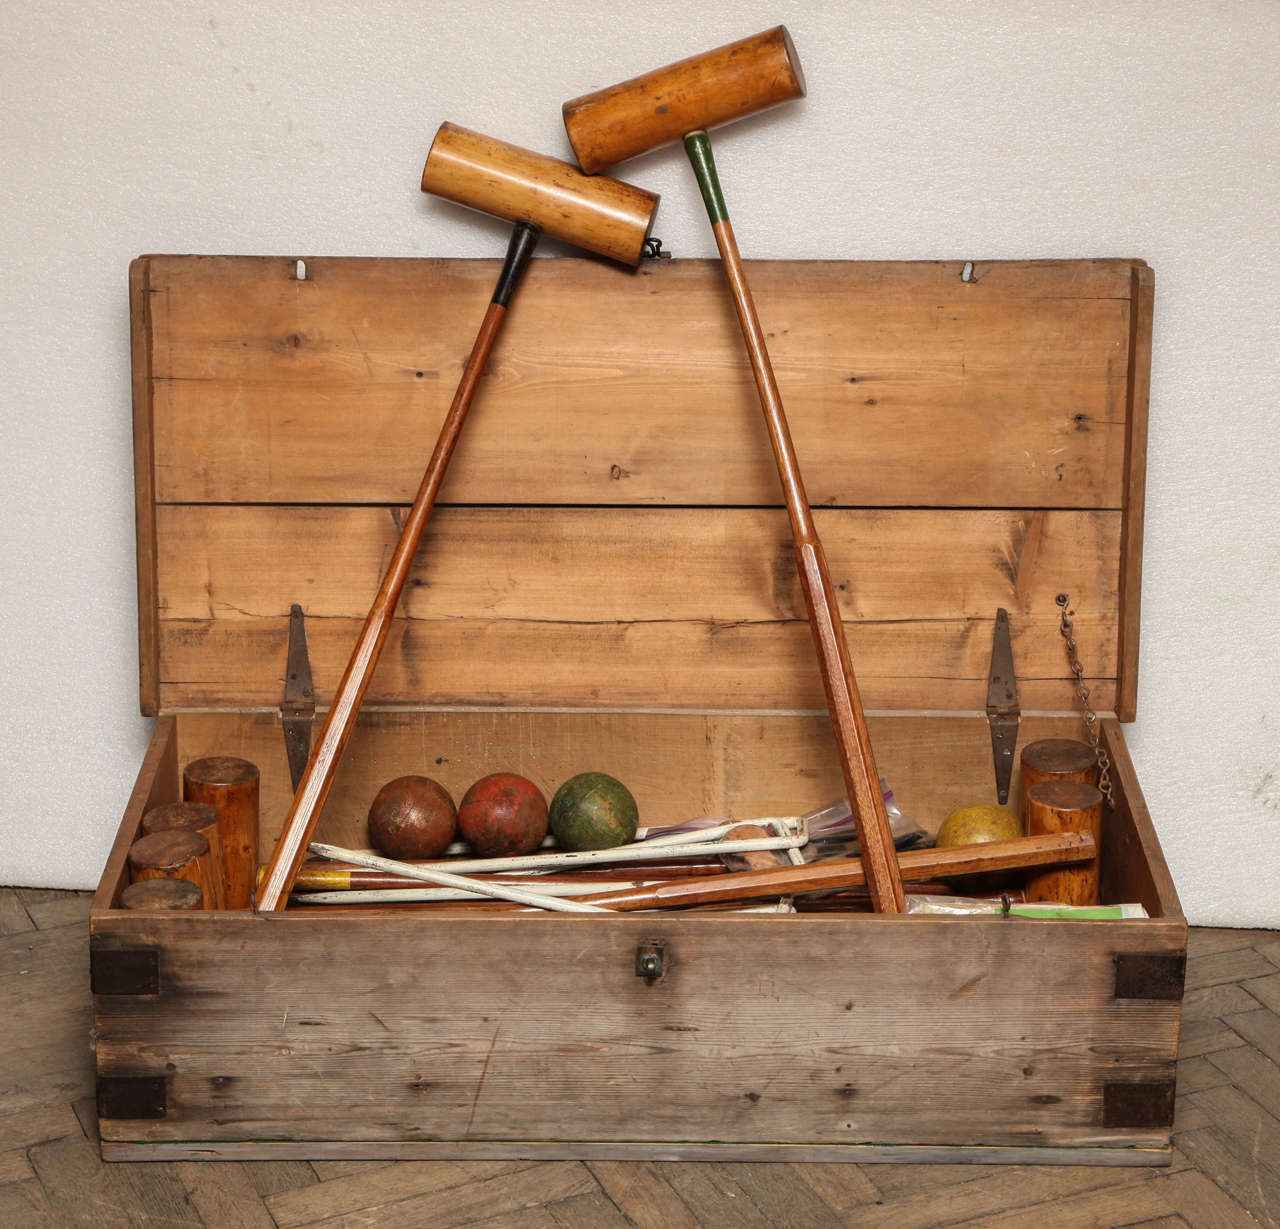 Antique croquet box with full croquet set included. Beautiful colors from original manufacturing still visible throughout the set.